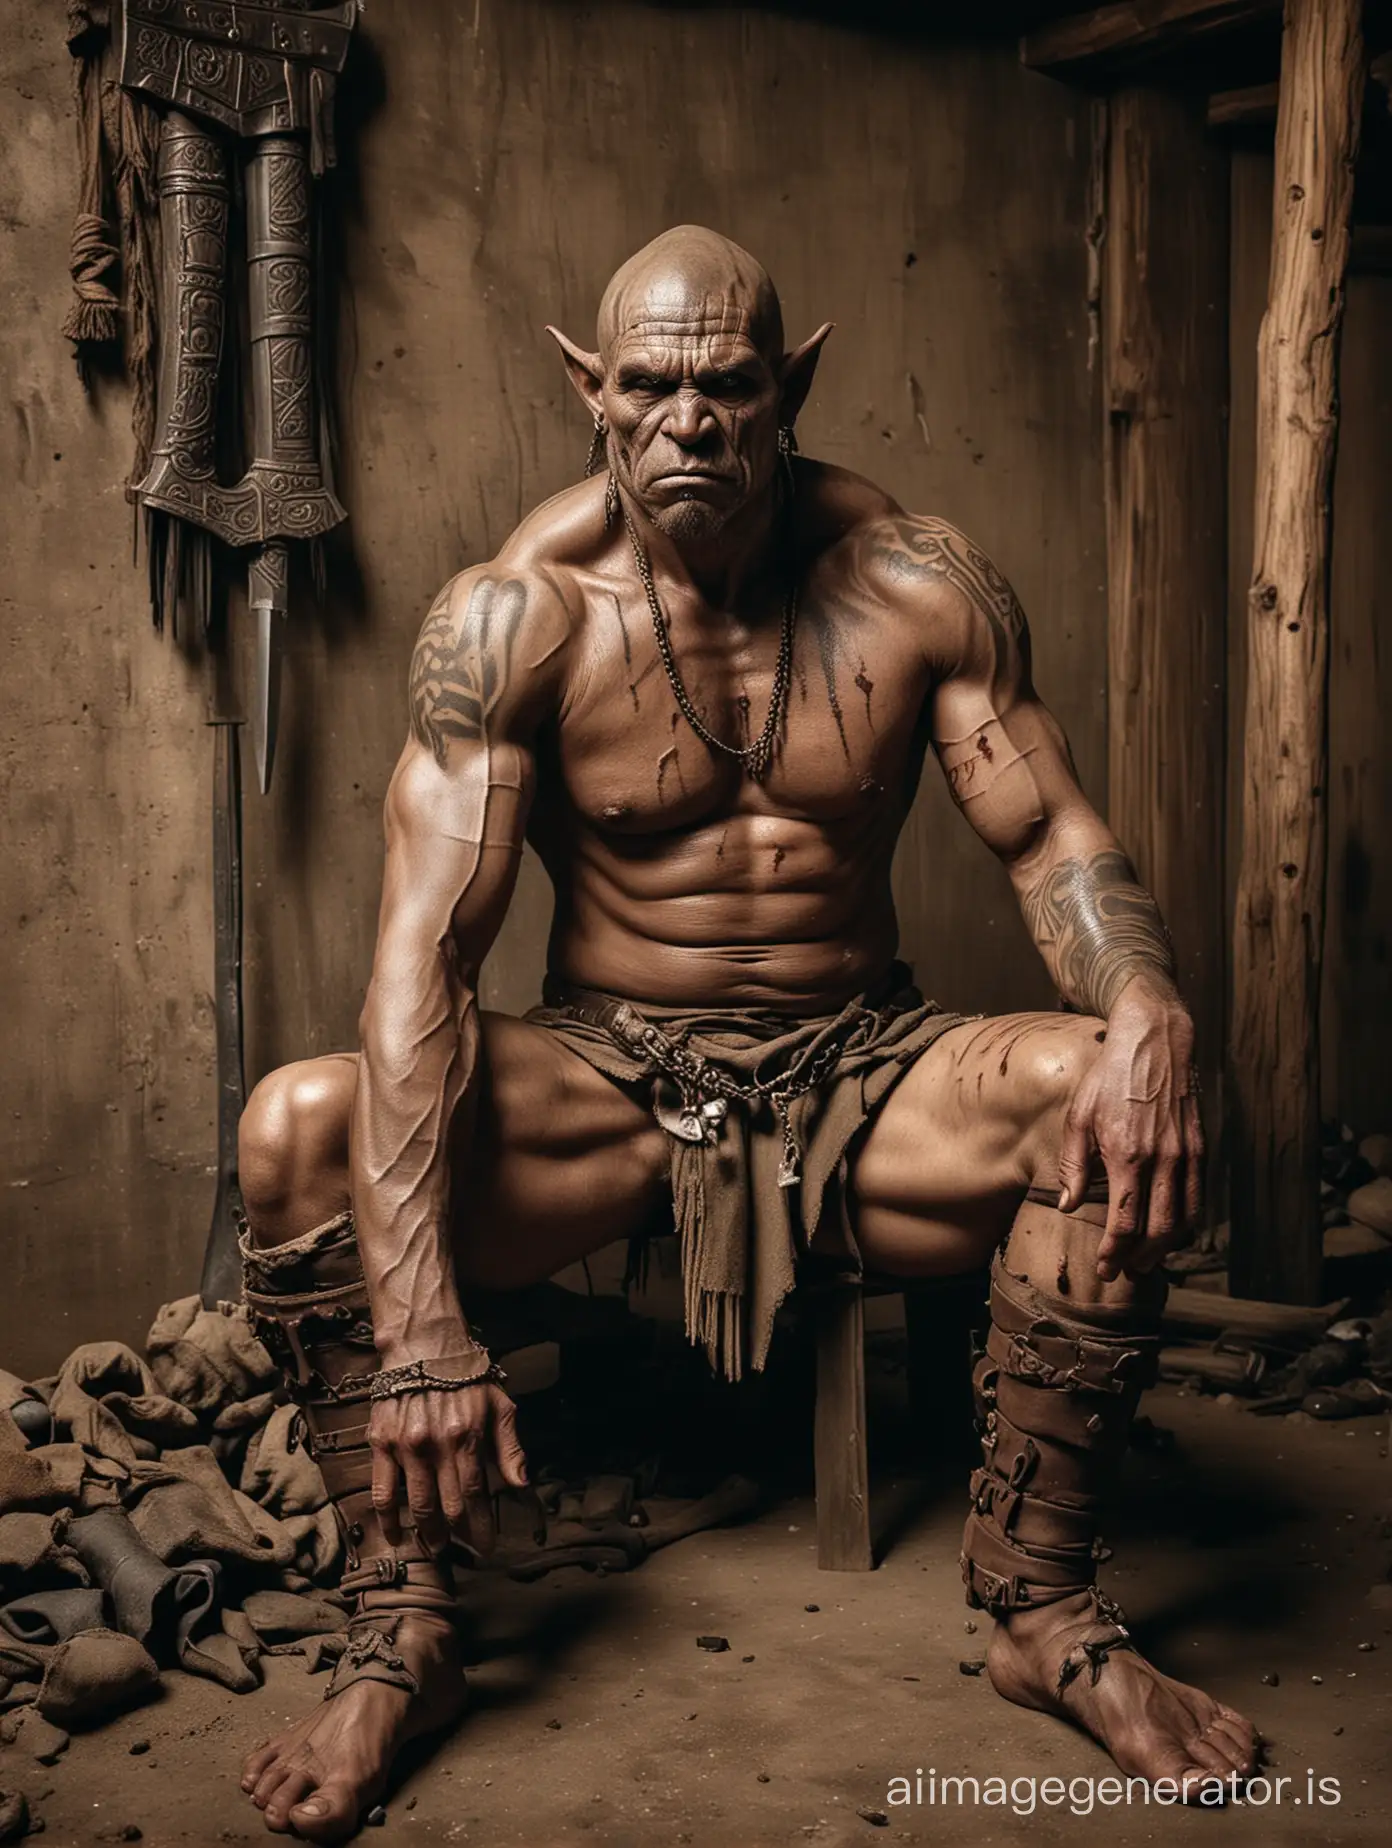 Contemplative-Naked-Orc-Chieftain-in-Gritty-Wooden-Hut